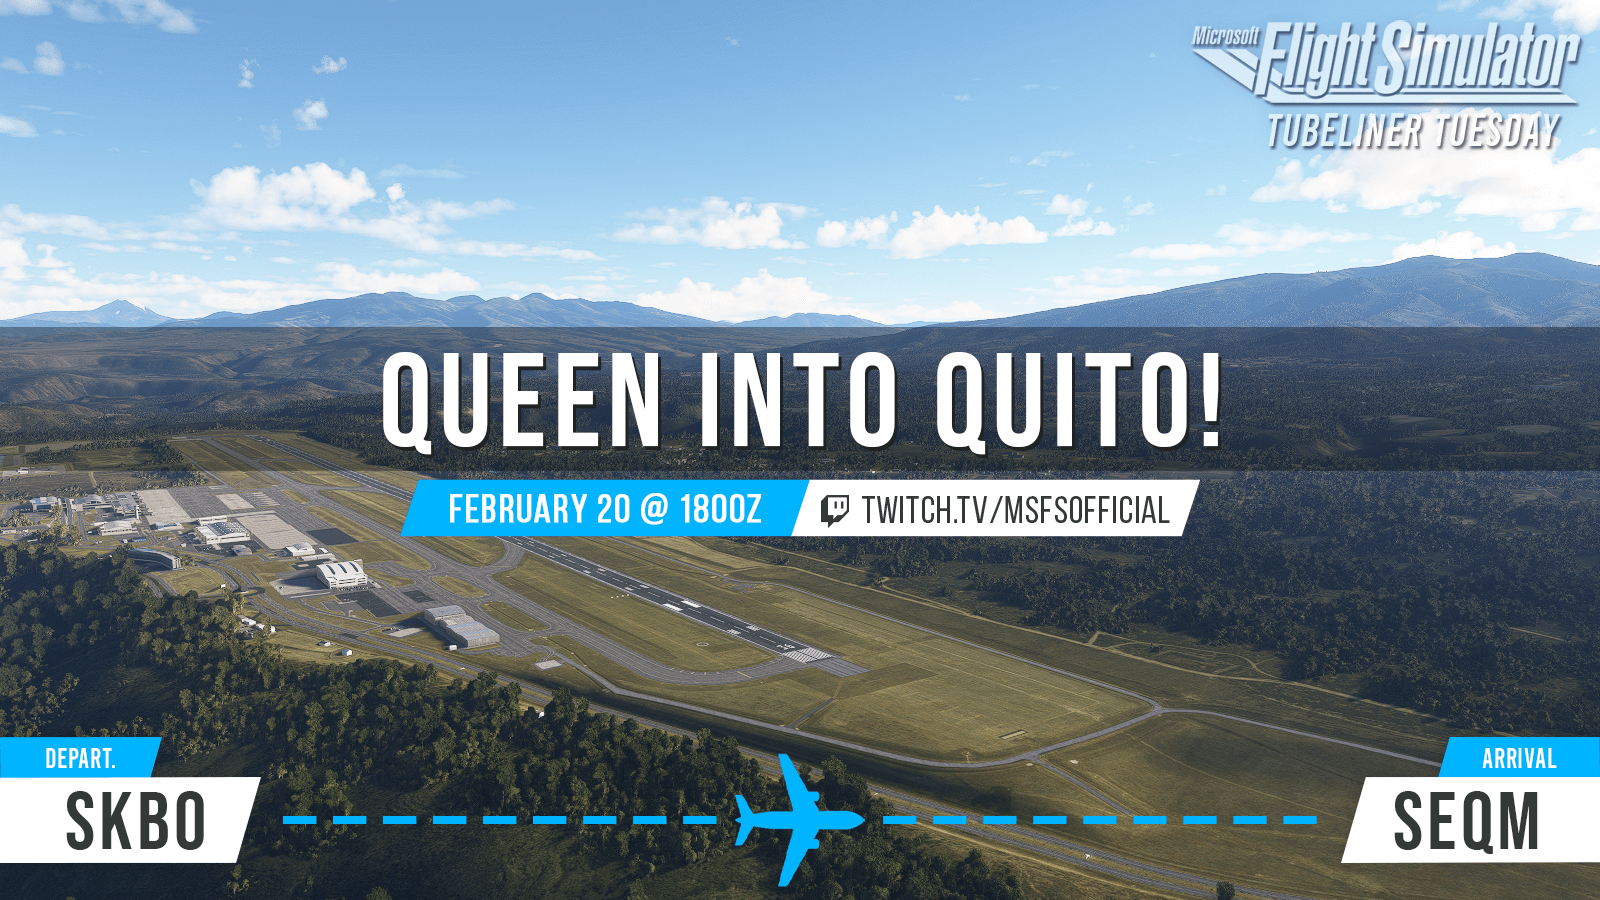 Tubeliner Tuesday: Queen Into Quito! February 20 at 1800 UTC. twitch.tv/msfsofficial